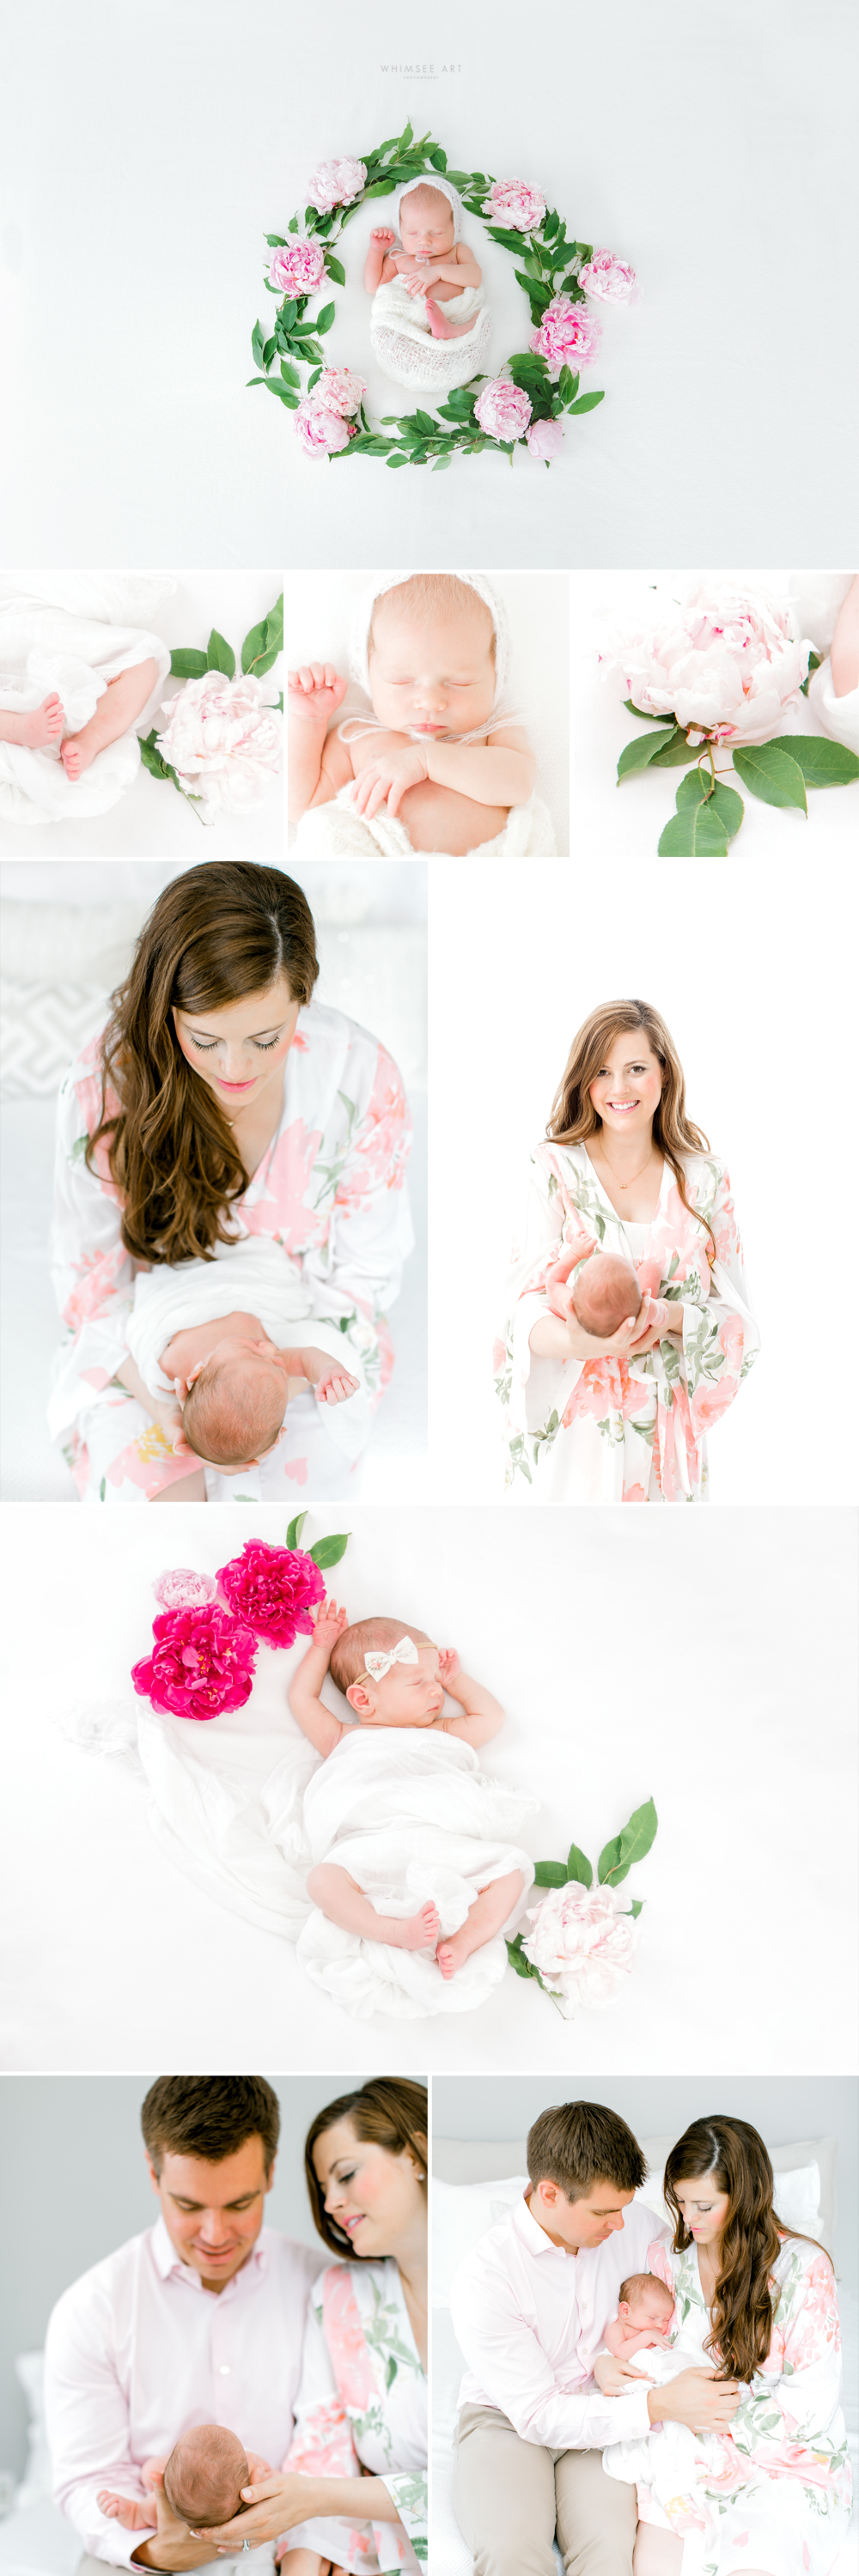 Bright Floral Studio Newborn Session | Whimsee Art Photography